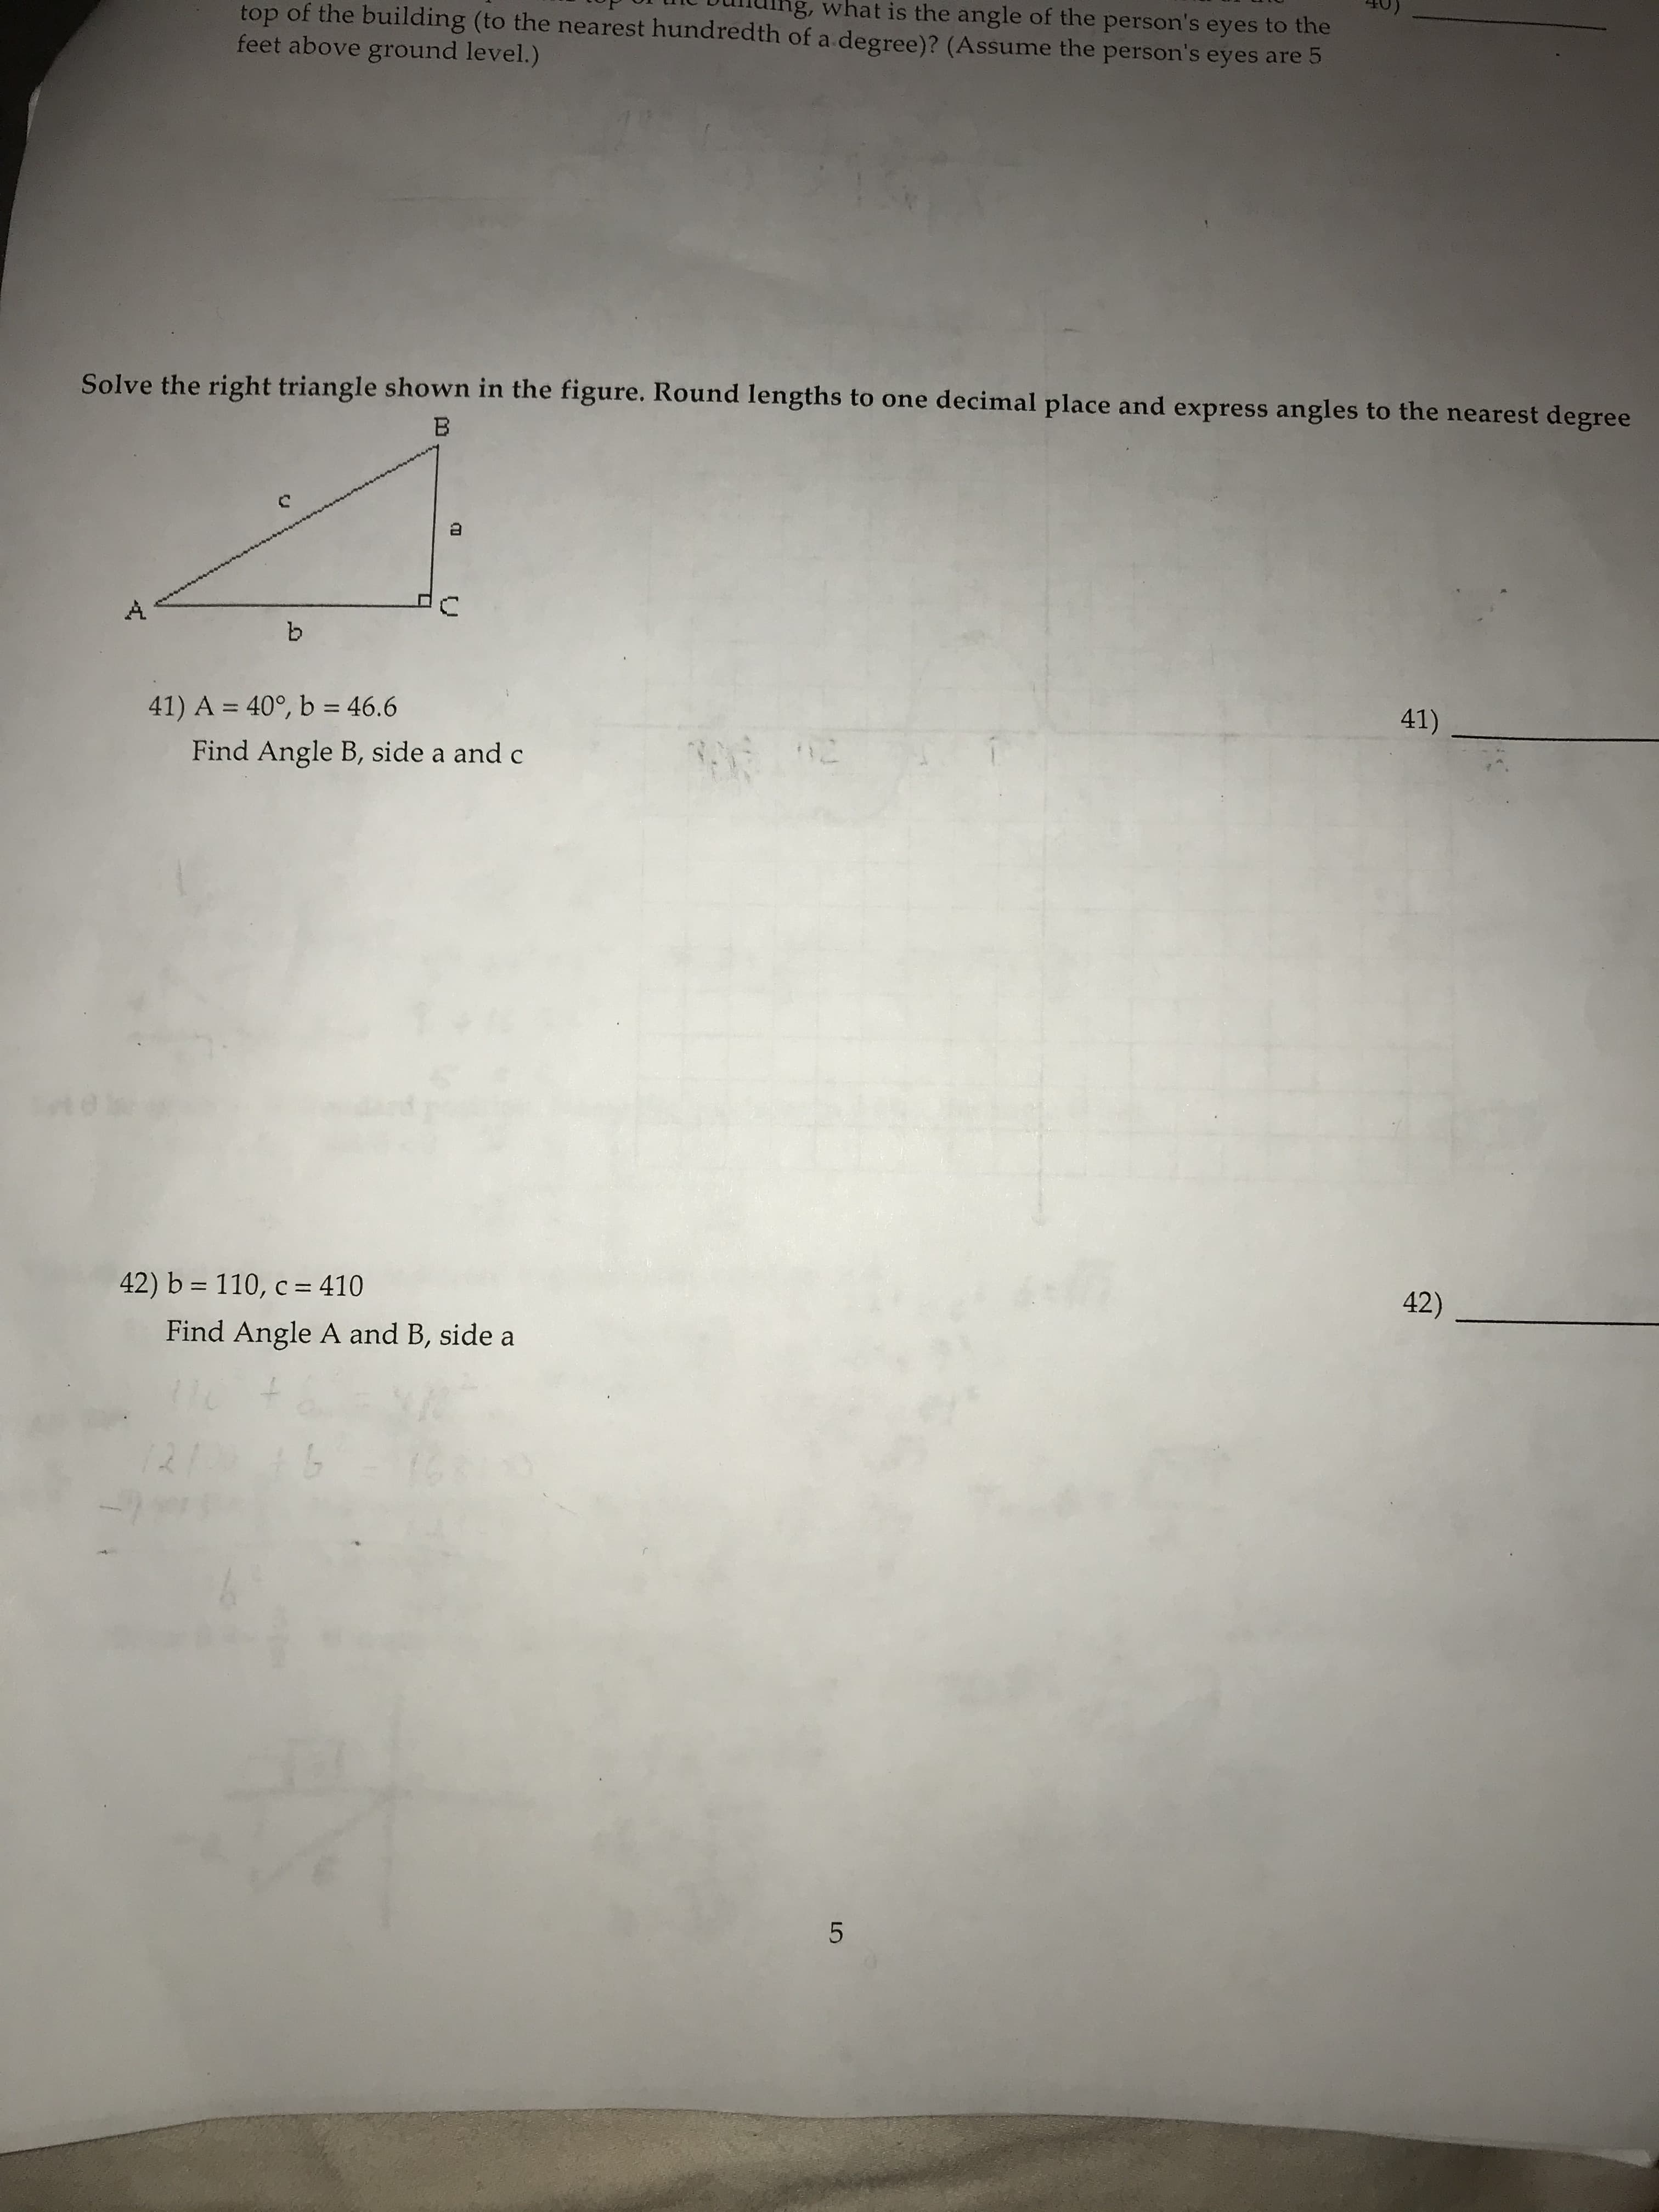 ng, what is the angle of the person's eyes to the
top of the building (to the nearest hundredth of a degree)? (Assume the person's eyes are 5
feet above ground level.)
Solve the right triangle shown in the figure. Round lengths to one decimal place and express angles to the nearest degree
b.
41)
41) A = 40°, b = 46.6
%3D
%3D
Find Angle B, side a and c
42)
42) b = 110, c = 410
Find Angle A and B, side a
1211
A.
